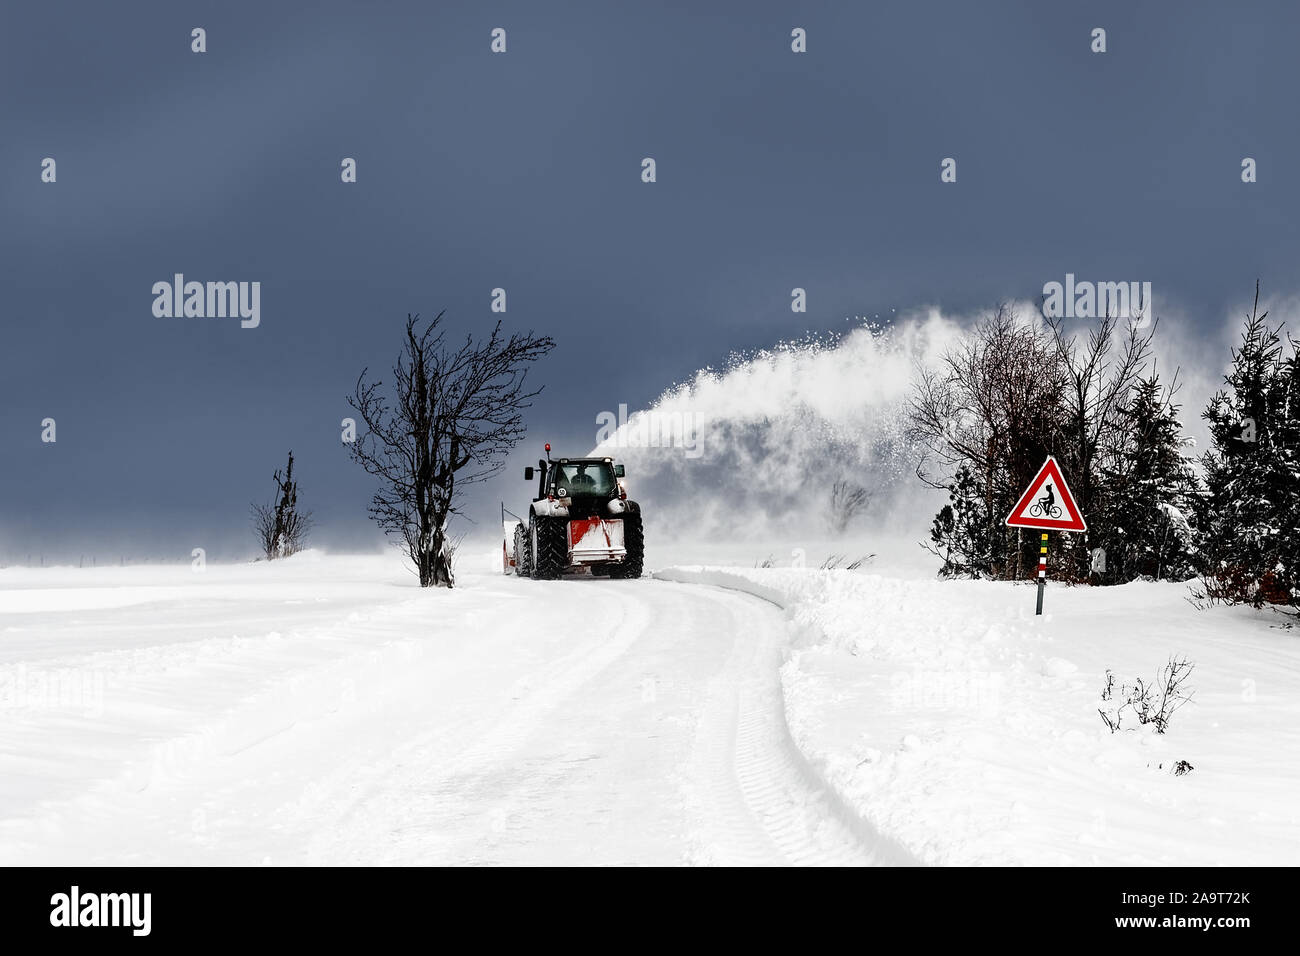 A tractor working as a snow plough uncovers a snow-covered road, the snow flies away in a high arc, dark sky, sign for cyclists - Location: border reg Stock Photo